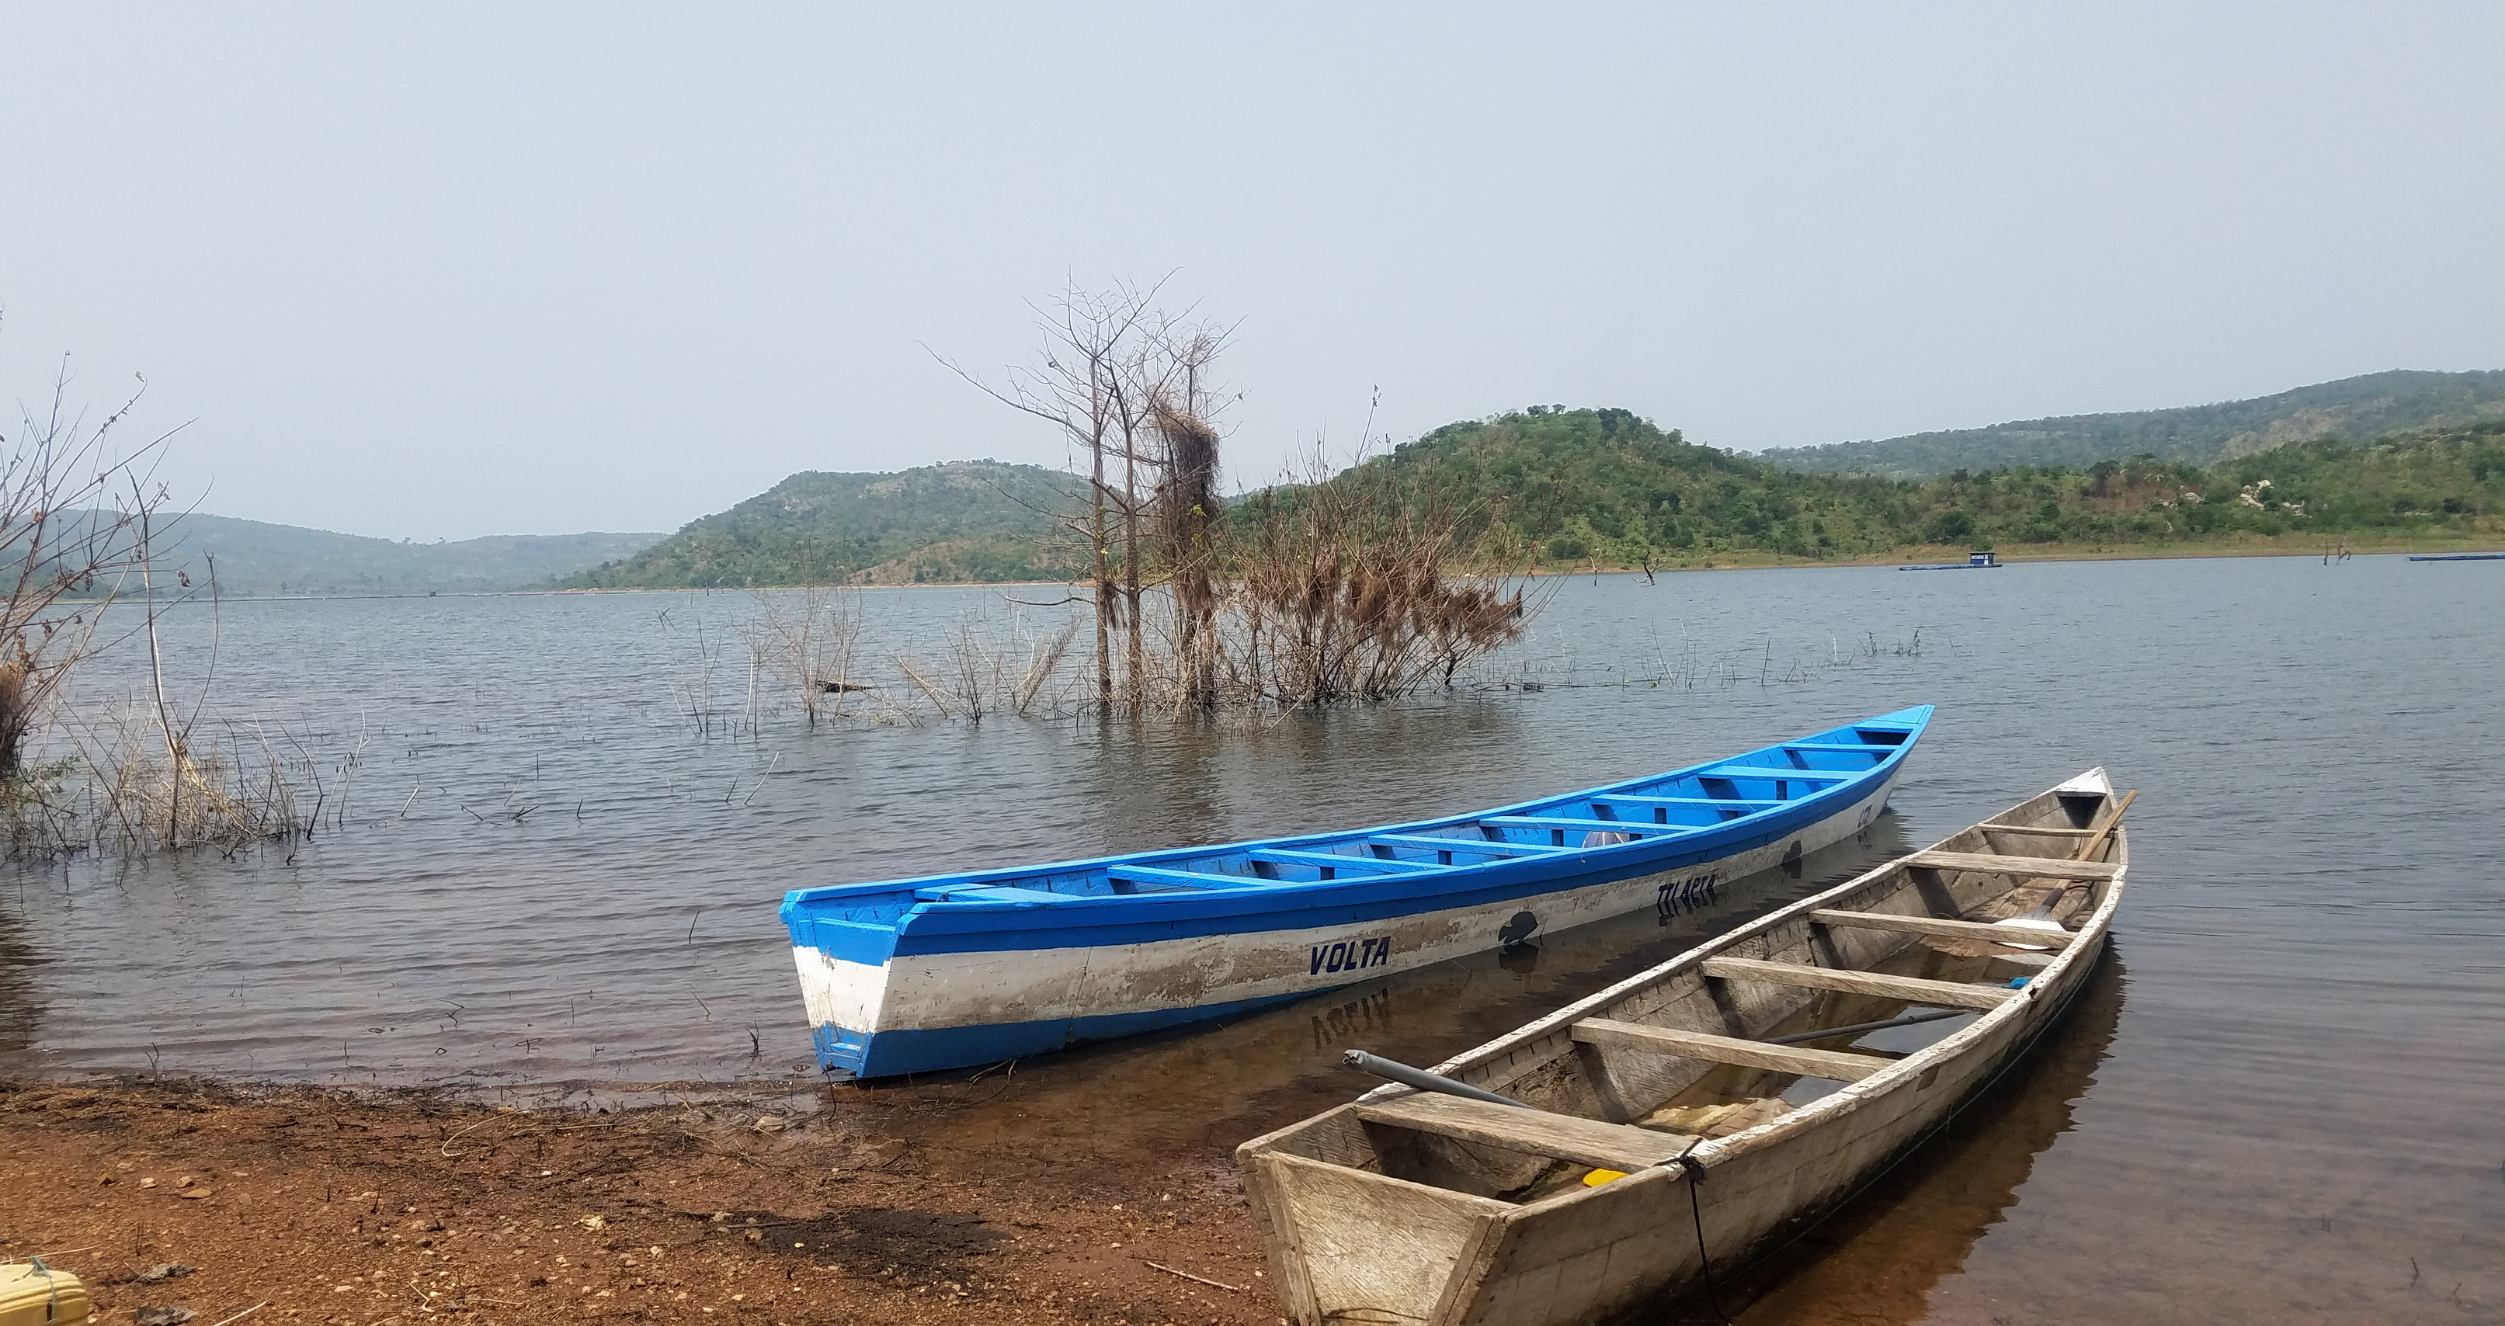 Two boats on a lake in Ghana